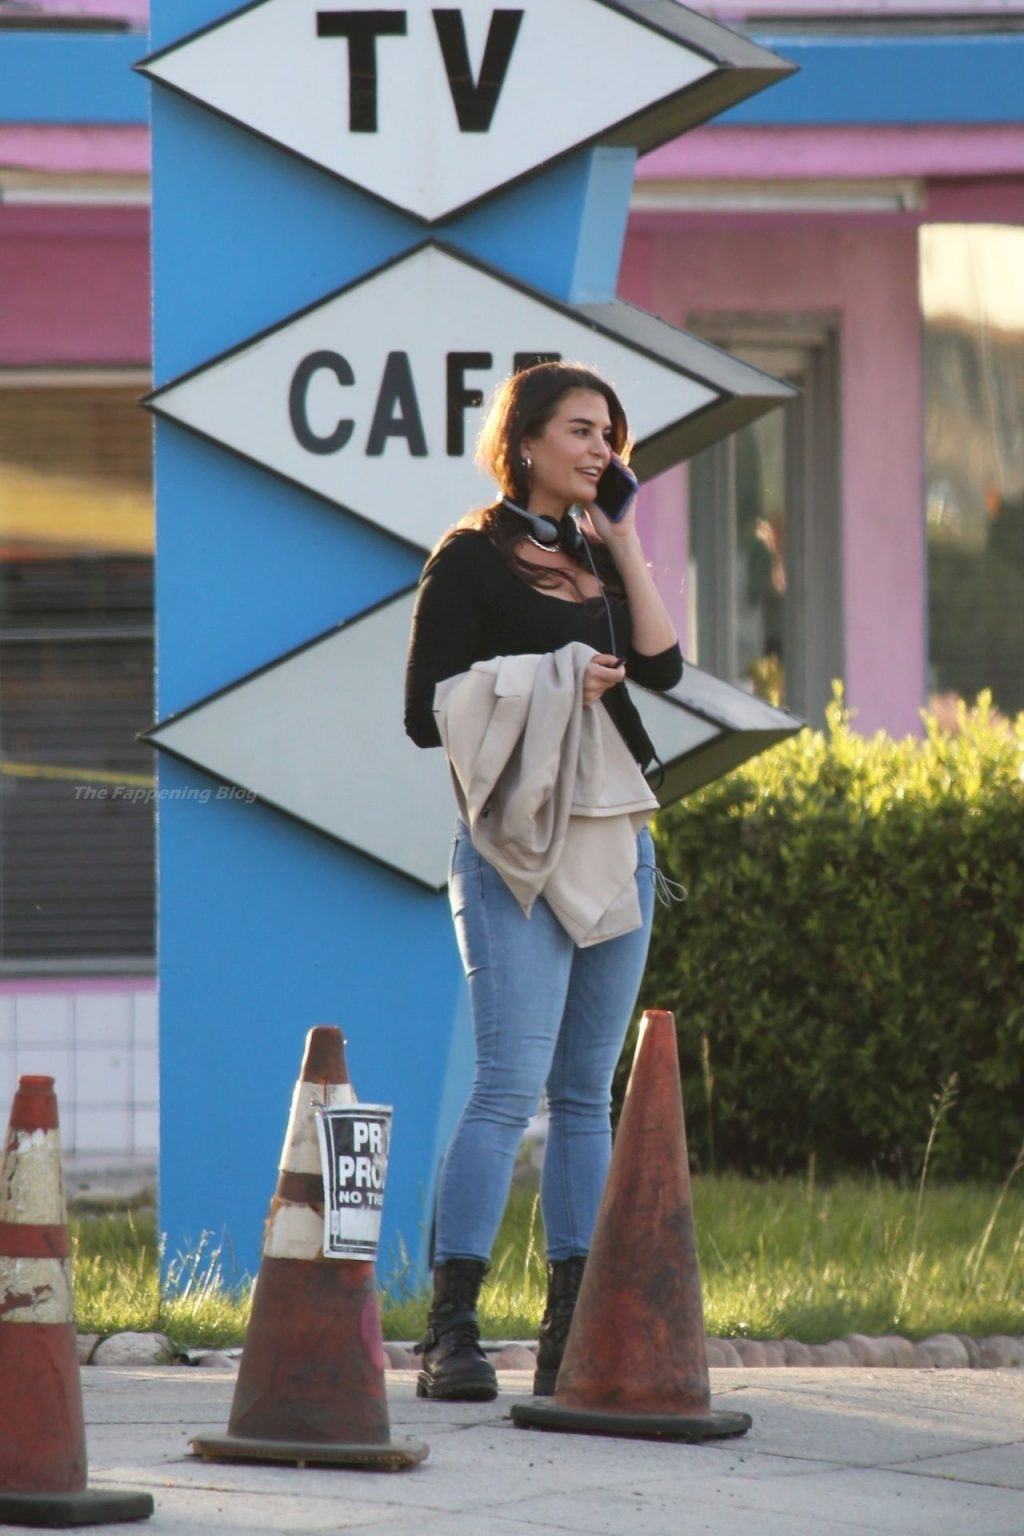 Teodora Djuric Takes a Break From Filming at The Pink Motel and Cadillac Jacks Cafe (18 Photos)